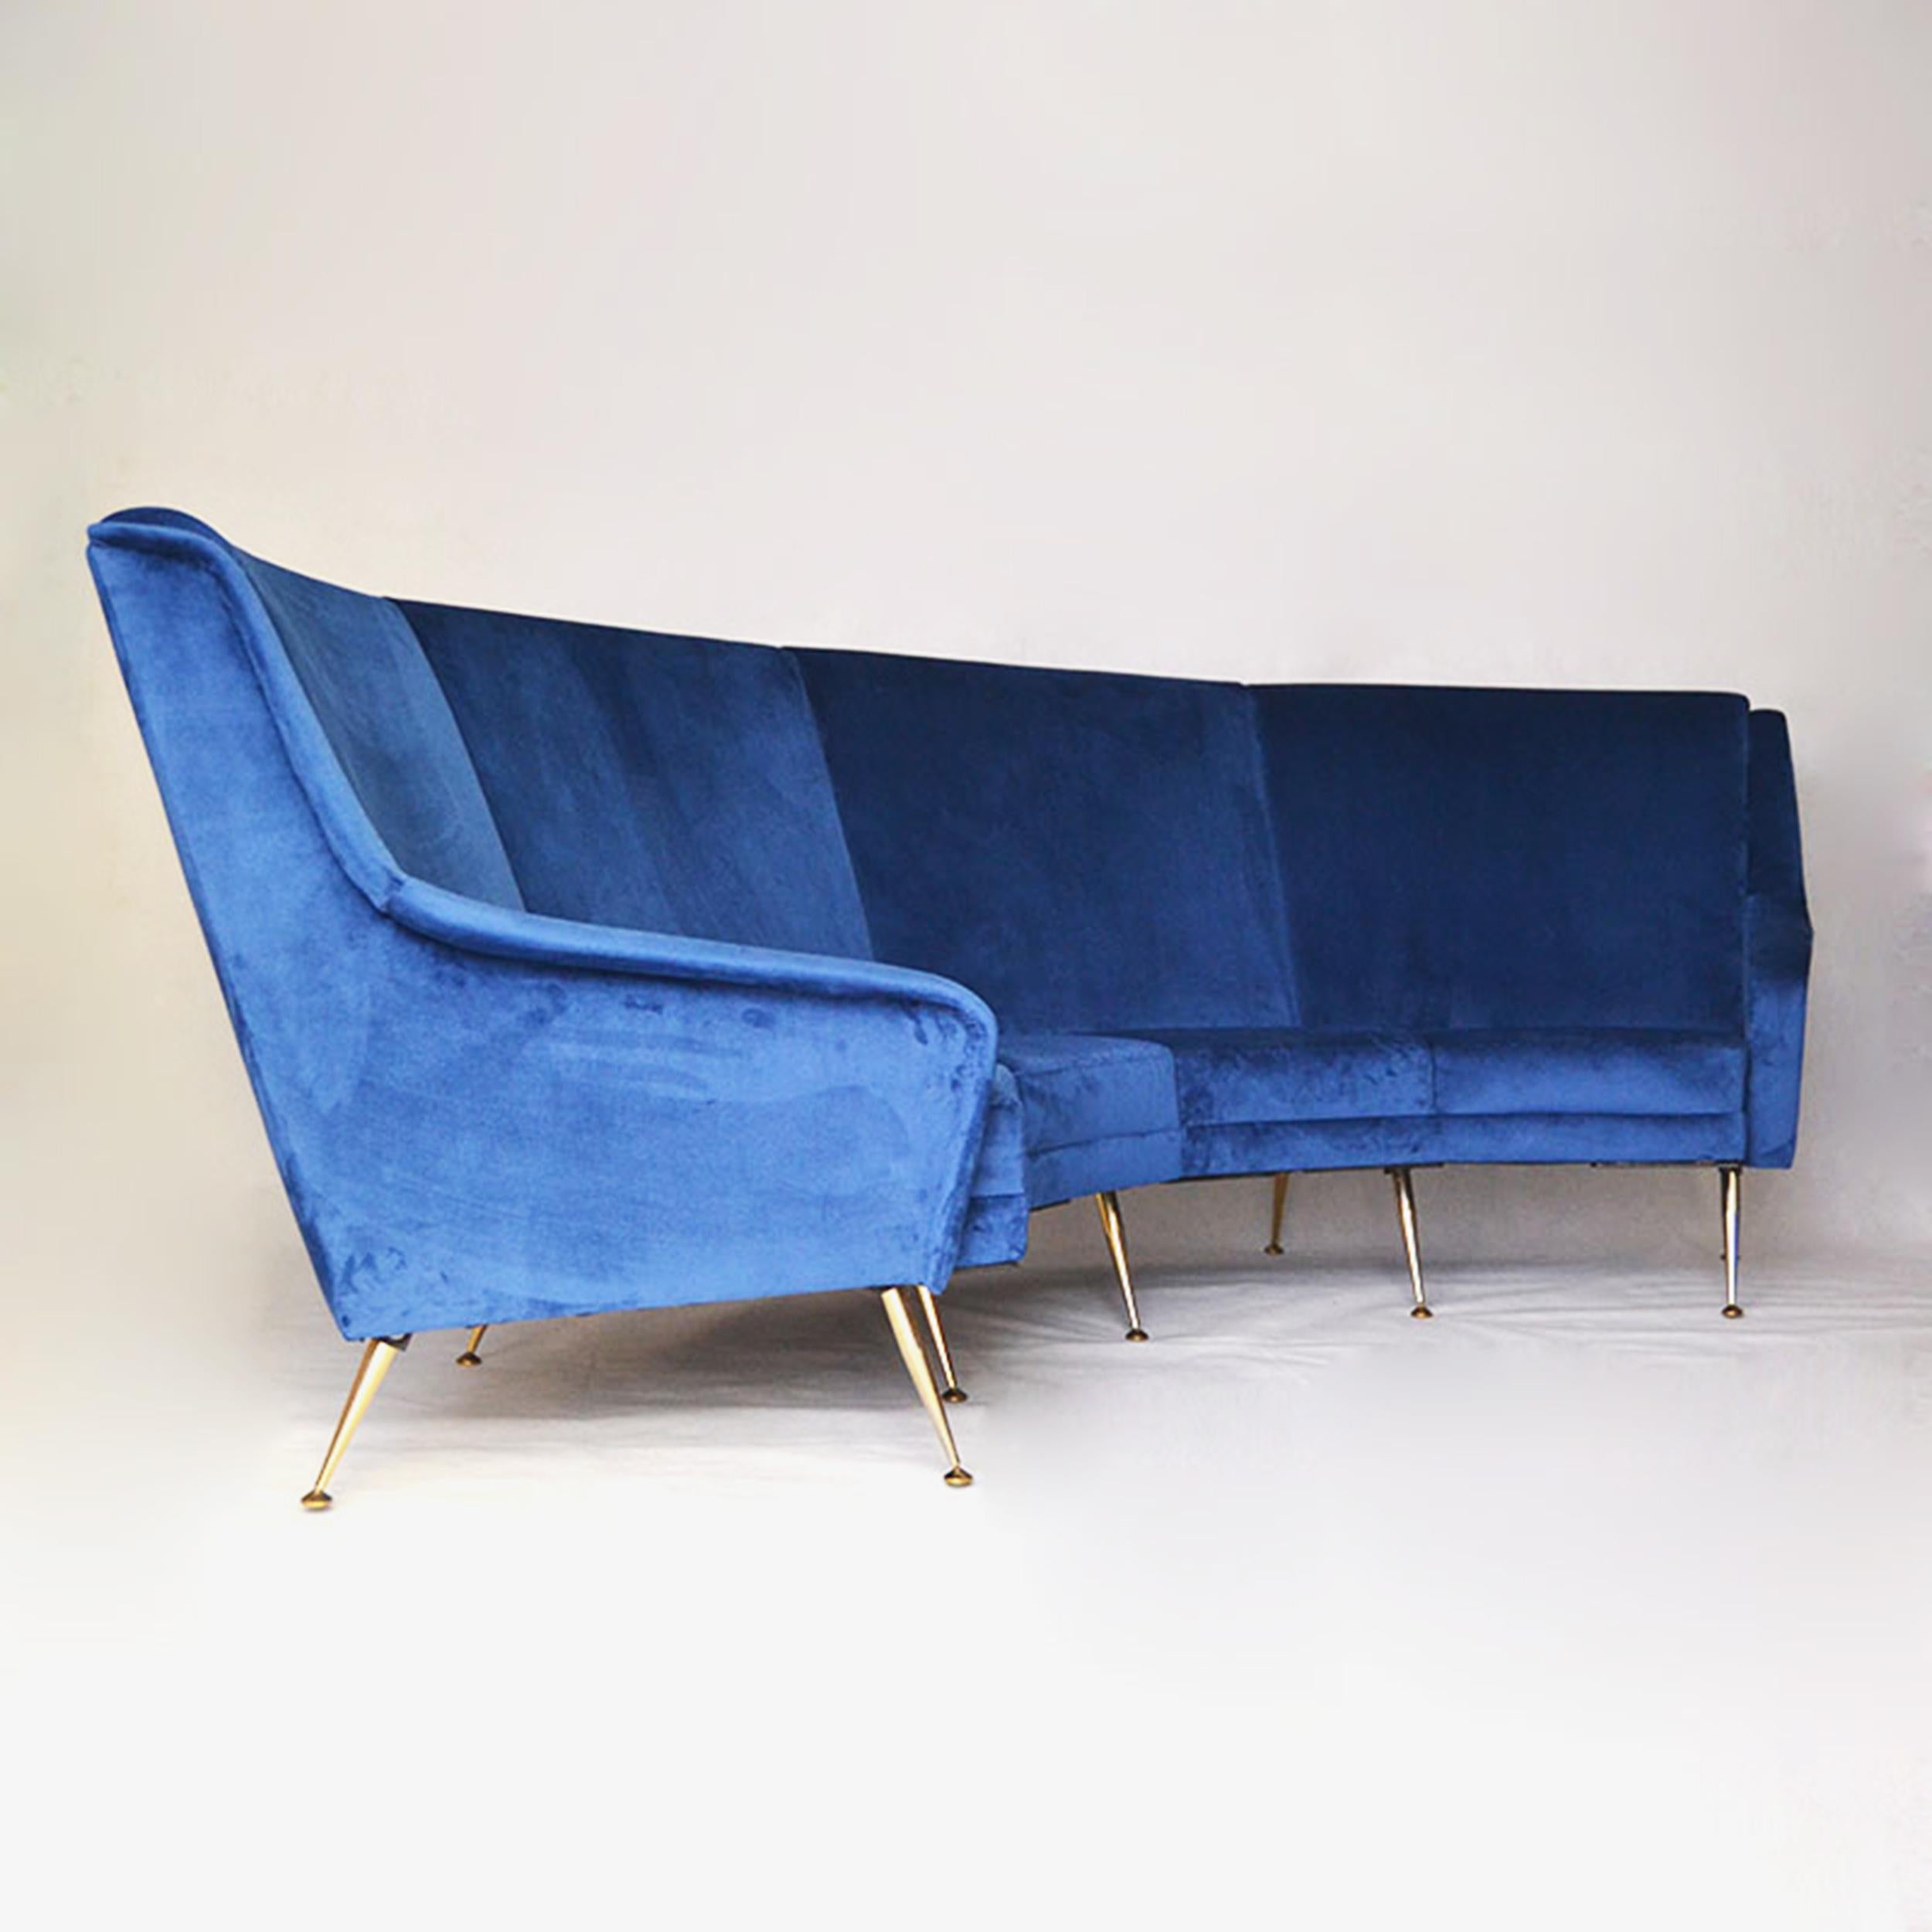 Large curved sofa in blue velvet and gold metal compass legs edited by Erton (retains label). France, 1950s.
Furniture edited by Erton, France,
circa 1950
Good vintage condition
Documentation: attached certificate of authenticity

